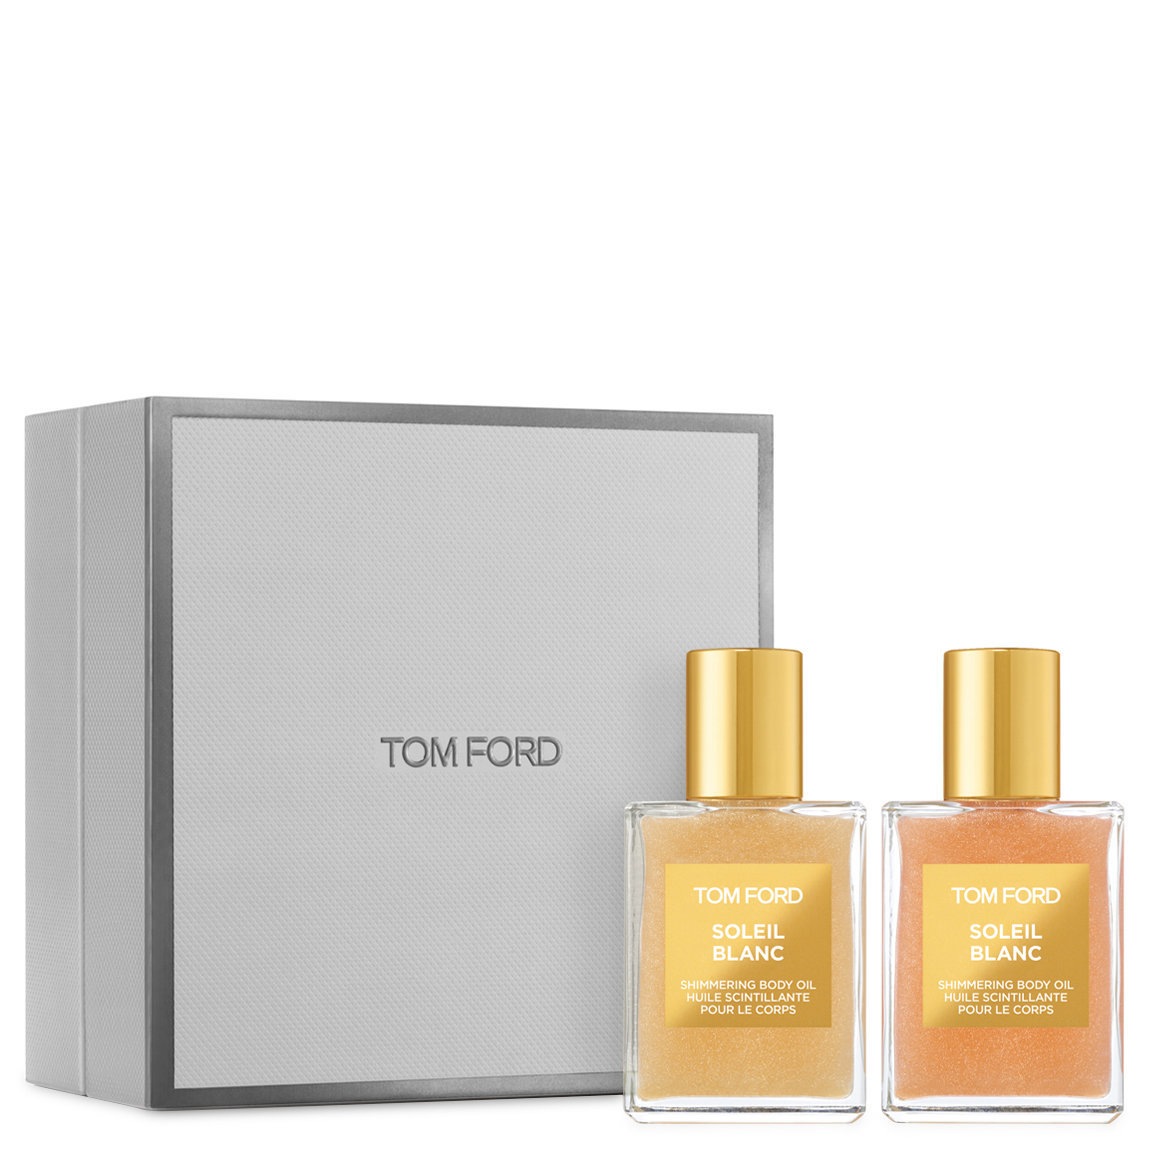 TOM FORD Soleil Blanc Shimmering Body Oil Duo | Beautylish